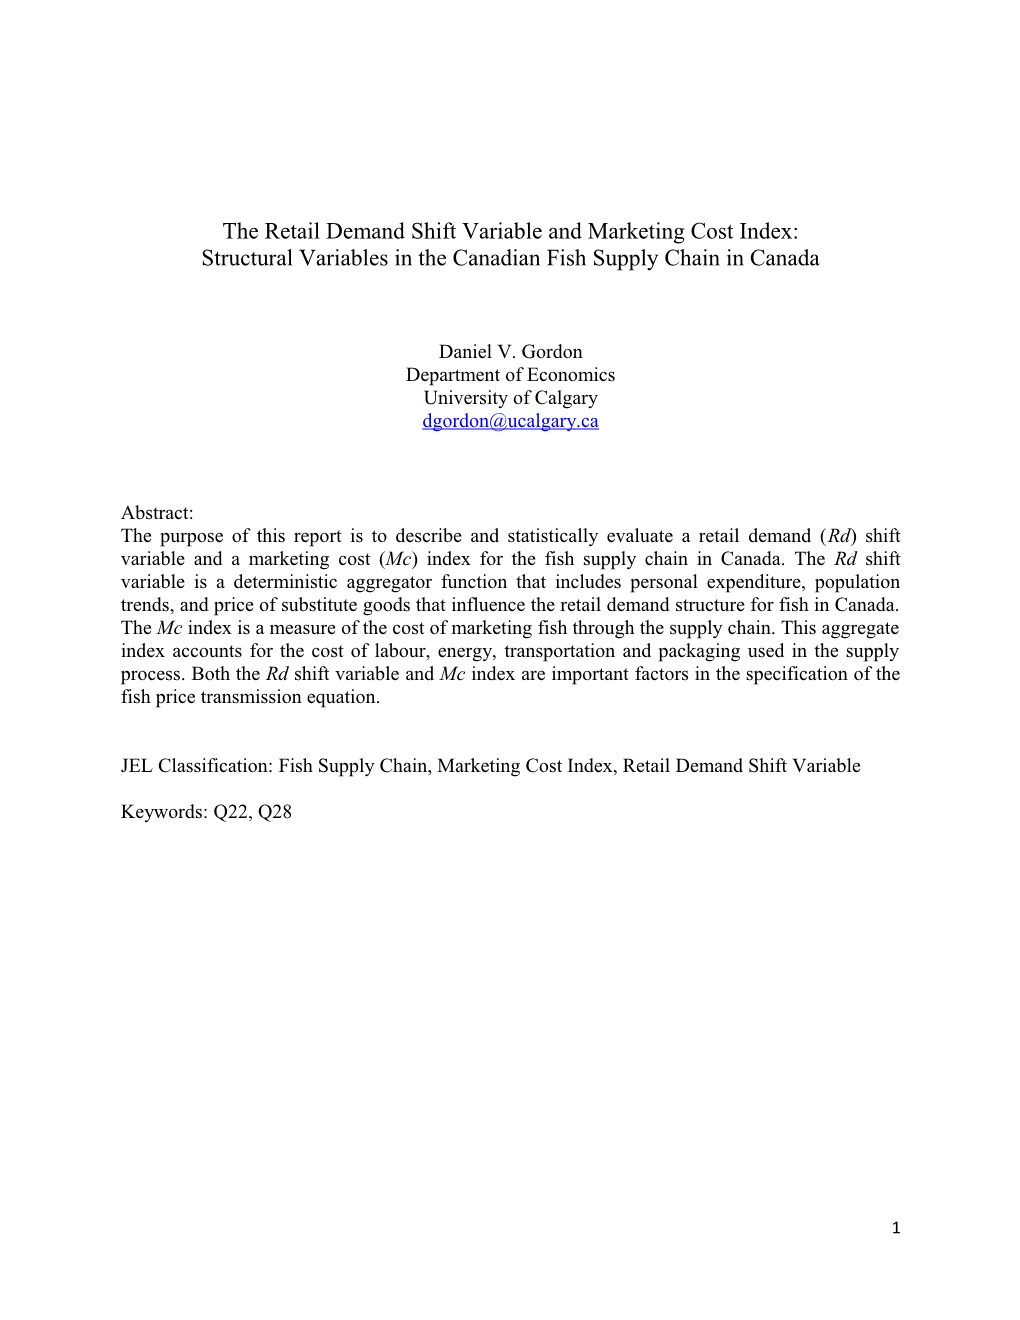 The Retail Demand Shift Variable and Marketing Cost Index